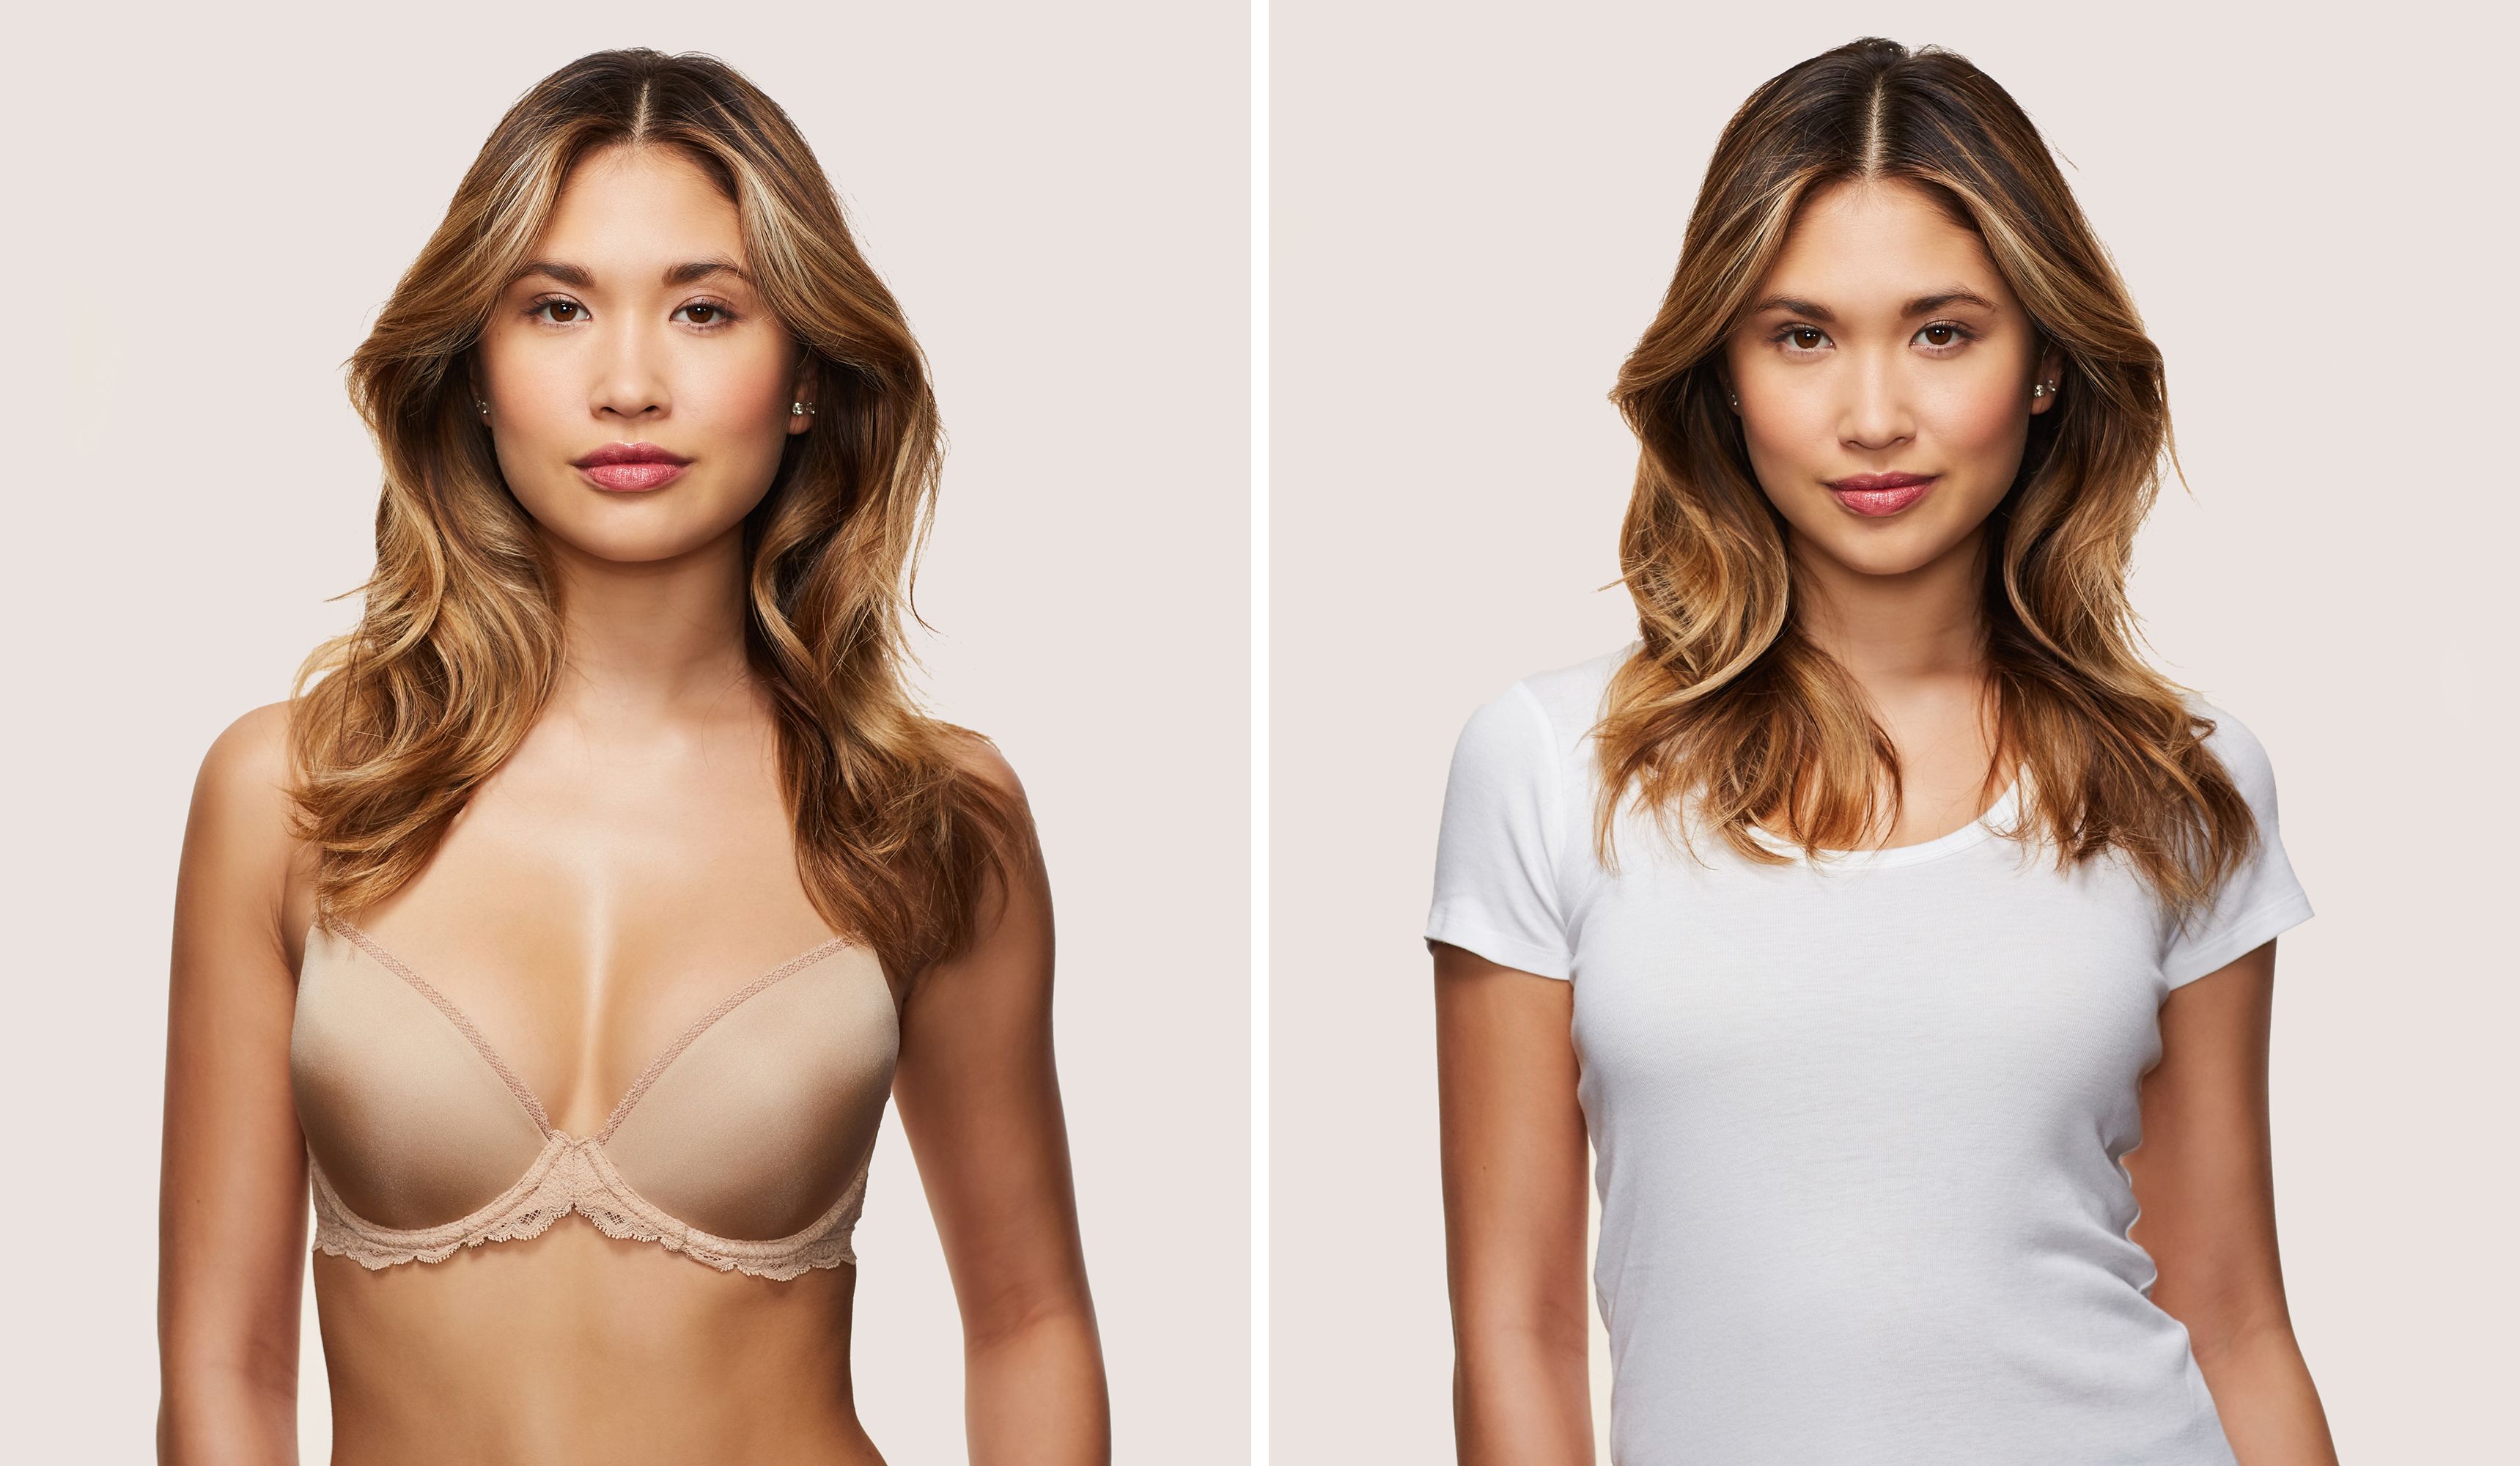 Contour Bra vs Push Up Bra: What's The Difference?